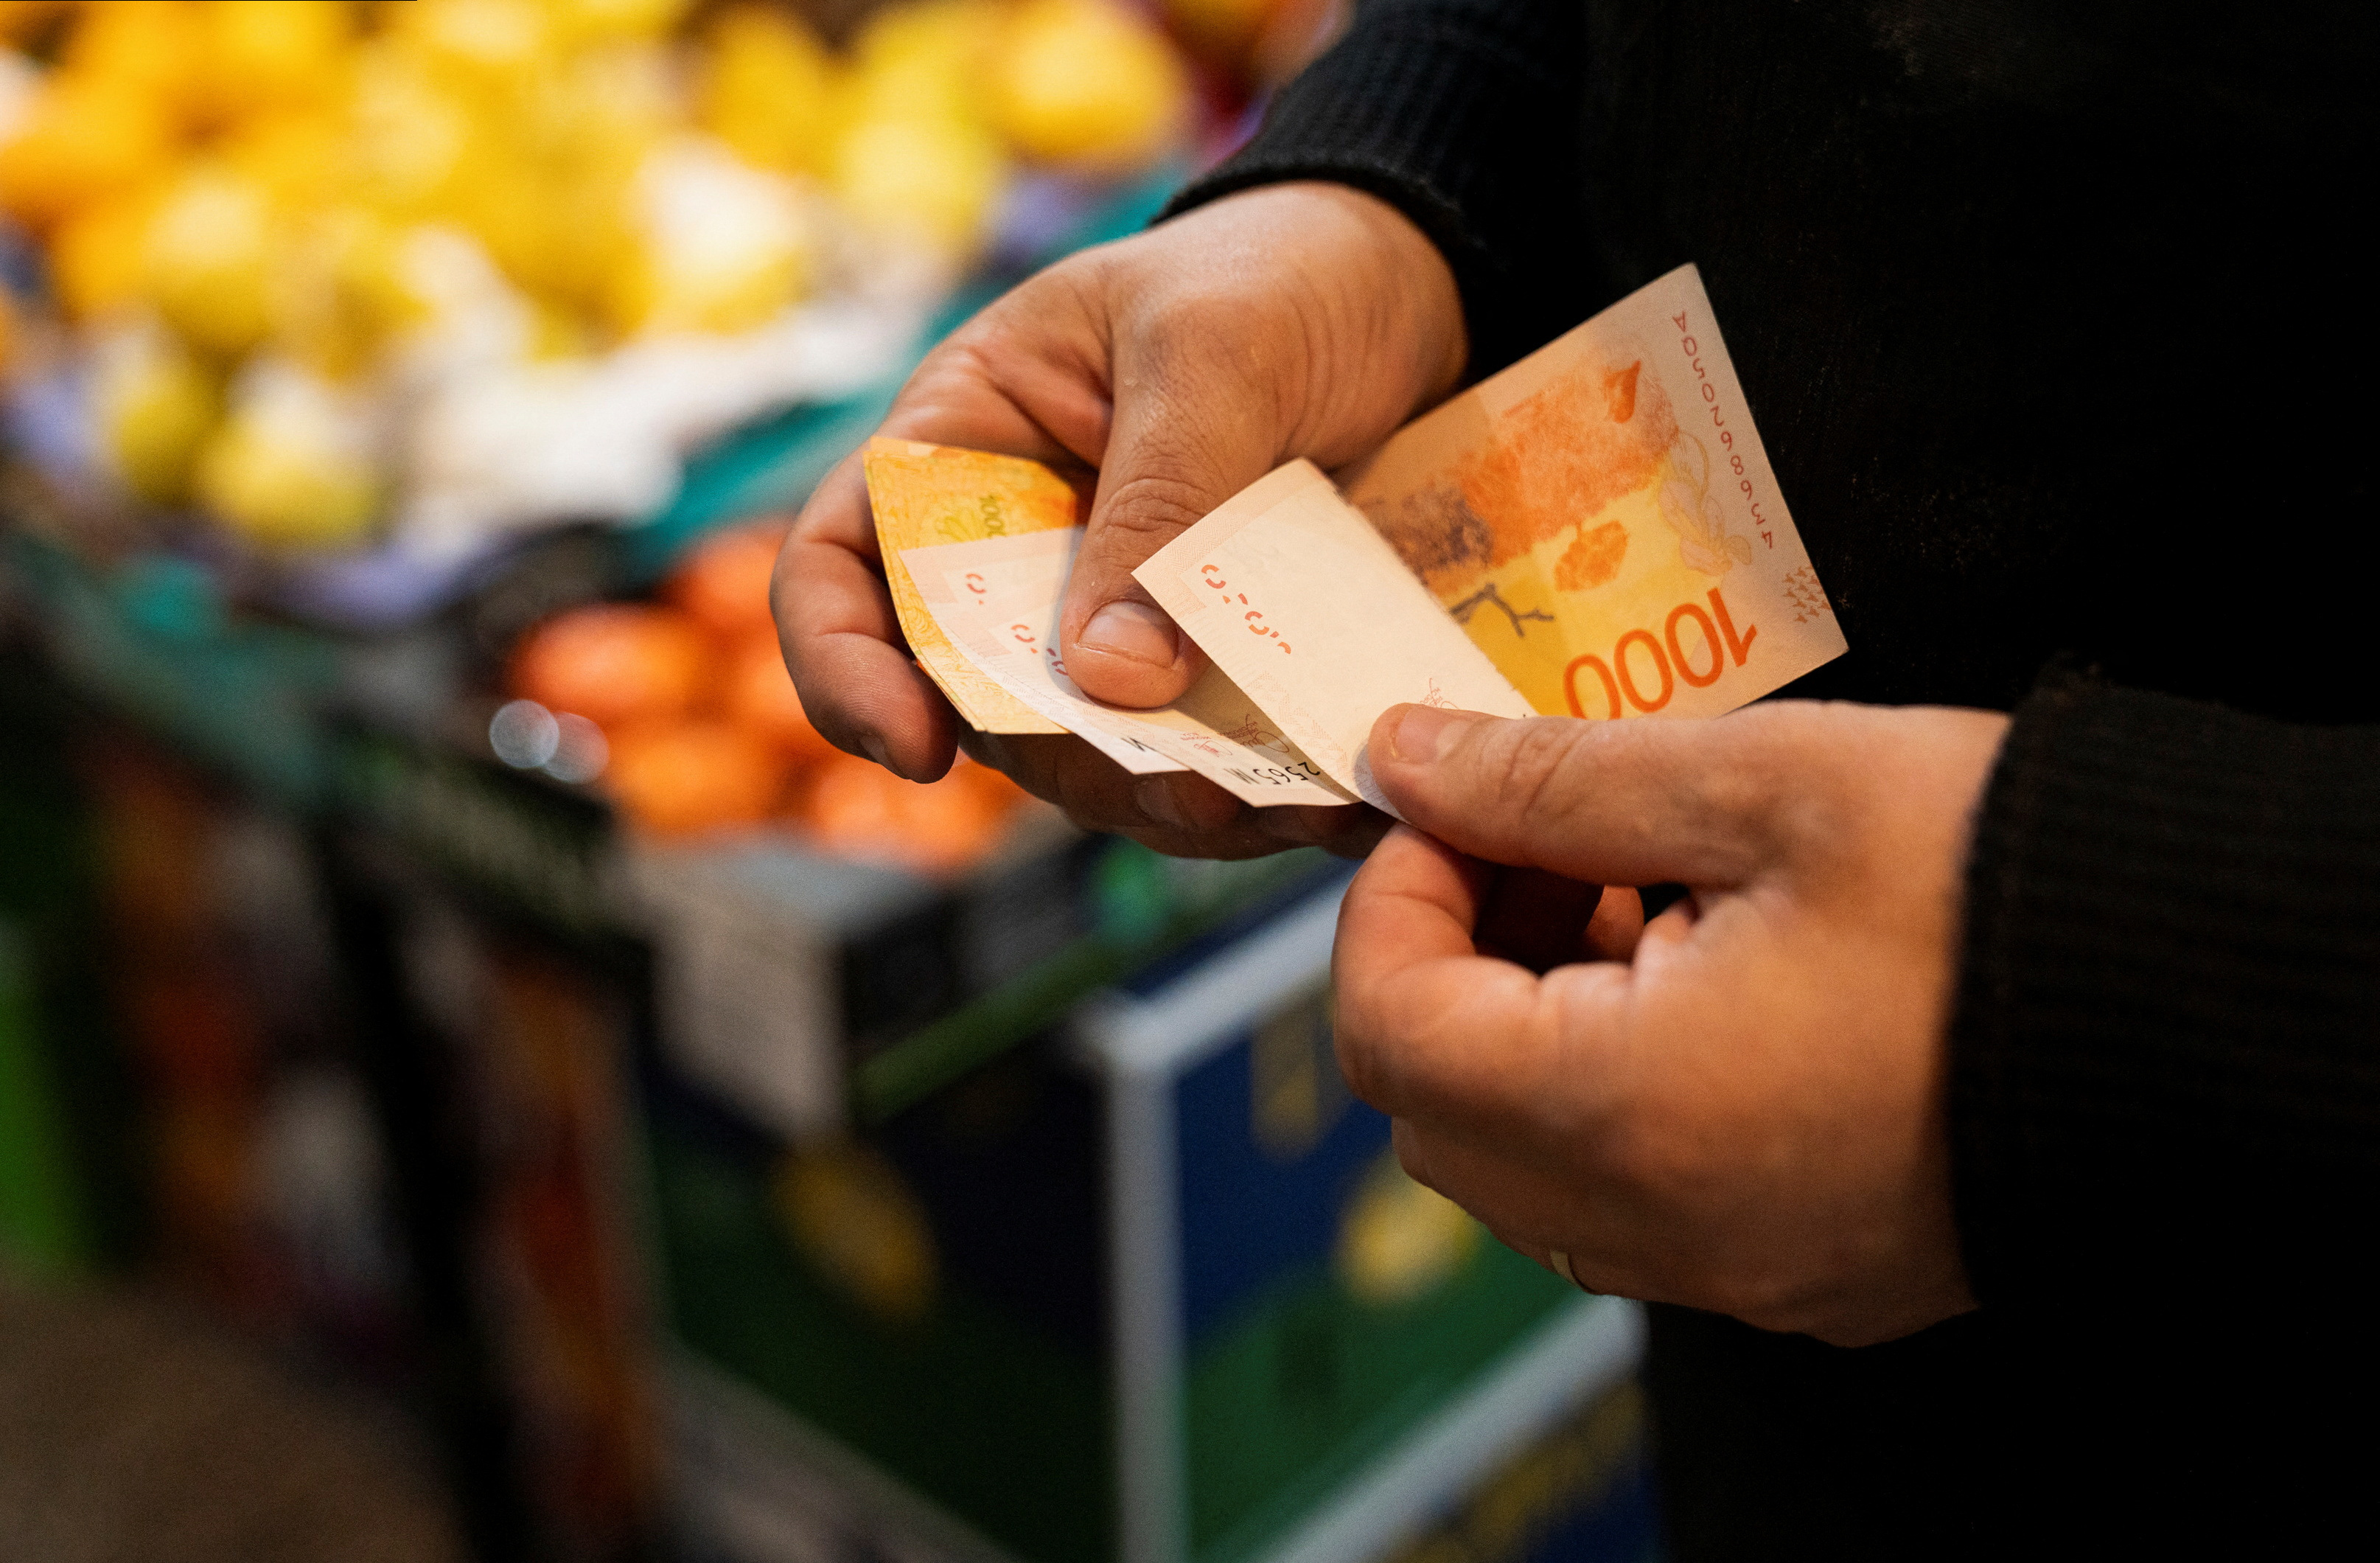 A greengrocer counts Argentine peso bills at a local market,as Argentina is due to release consumer inflation data for April, in Buenos Aires